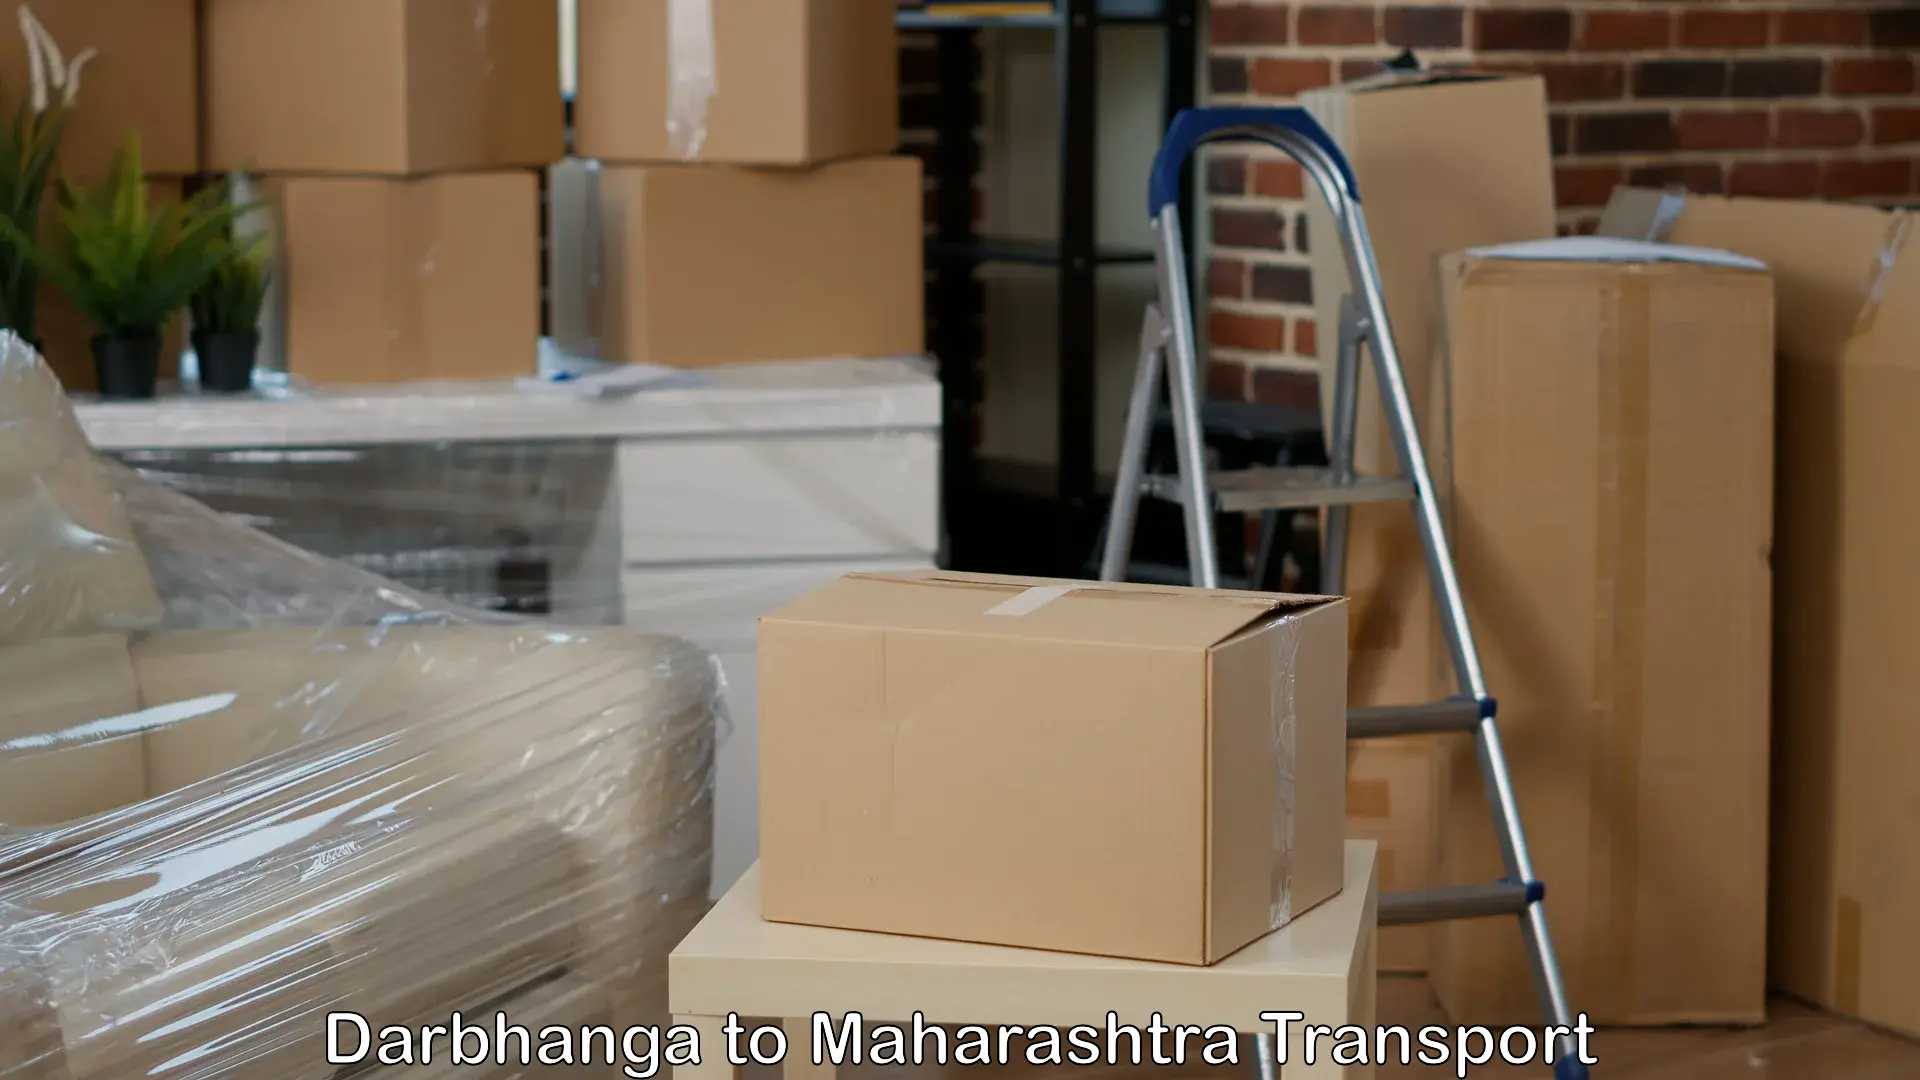 Container transportation services in Darbhanga to Mahabaleshwar